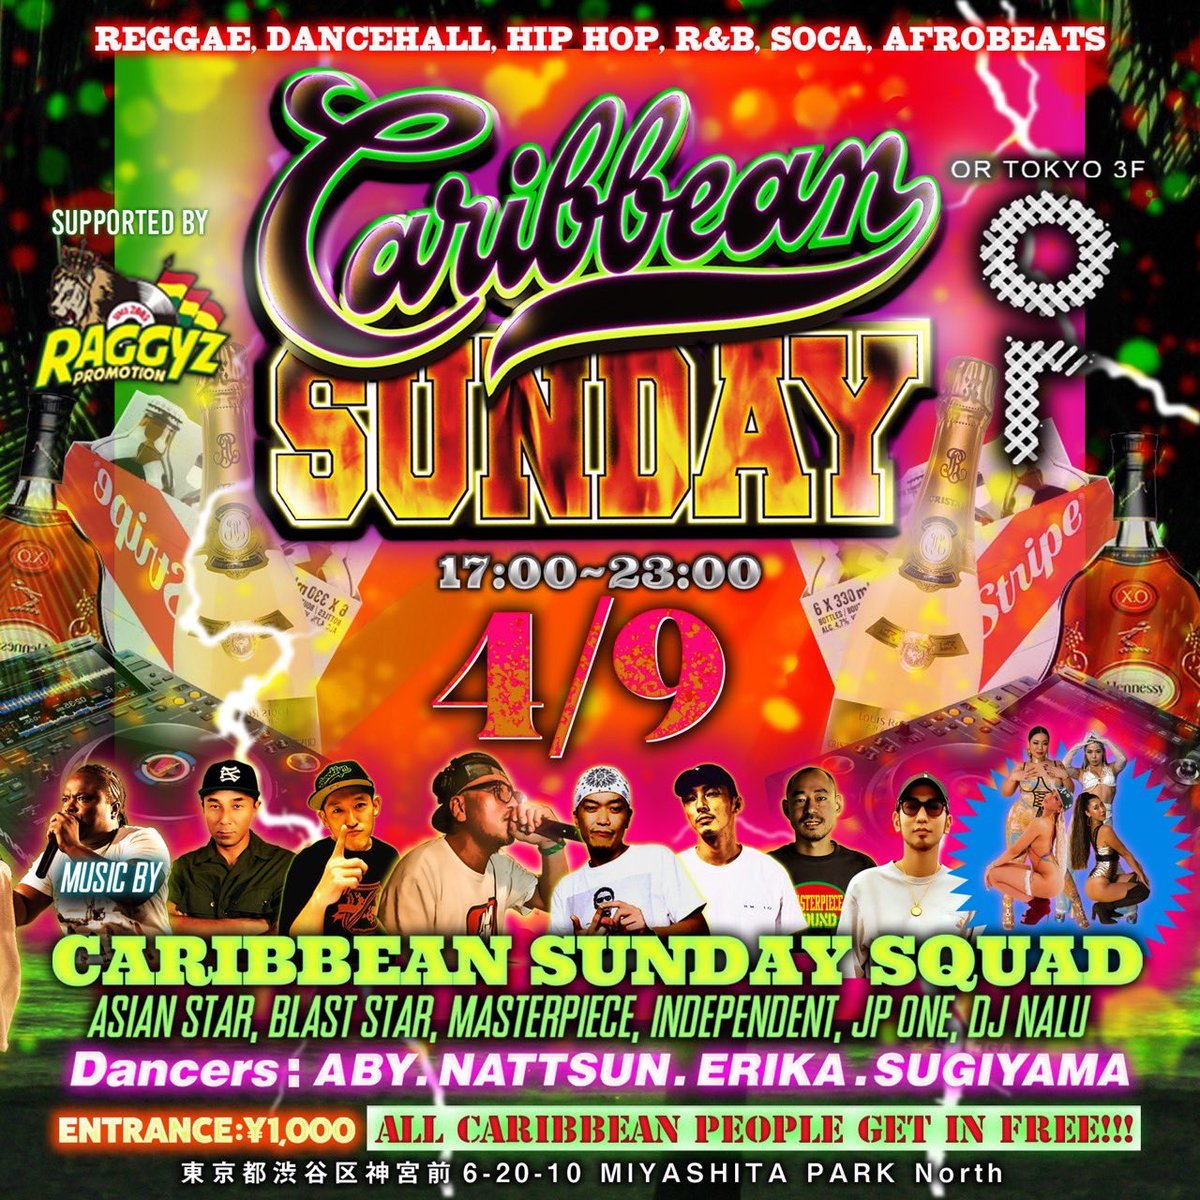 04.09(sun) #CARIBBEANSUNDAY @ortokyoofficial 3F 17:00-23:00 Entrance-¥1,000 All caribbean people get in free!!! Music By #caribbeansundaysquad ASIAN STAR BLAST STAR MASTERPIECE INDEPENDENT JP-ONE DJ NALU Dancers ABY / NATTSUN / ERIKA / SUGIYAMA Supported By @raggyzpromotion